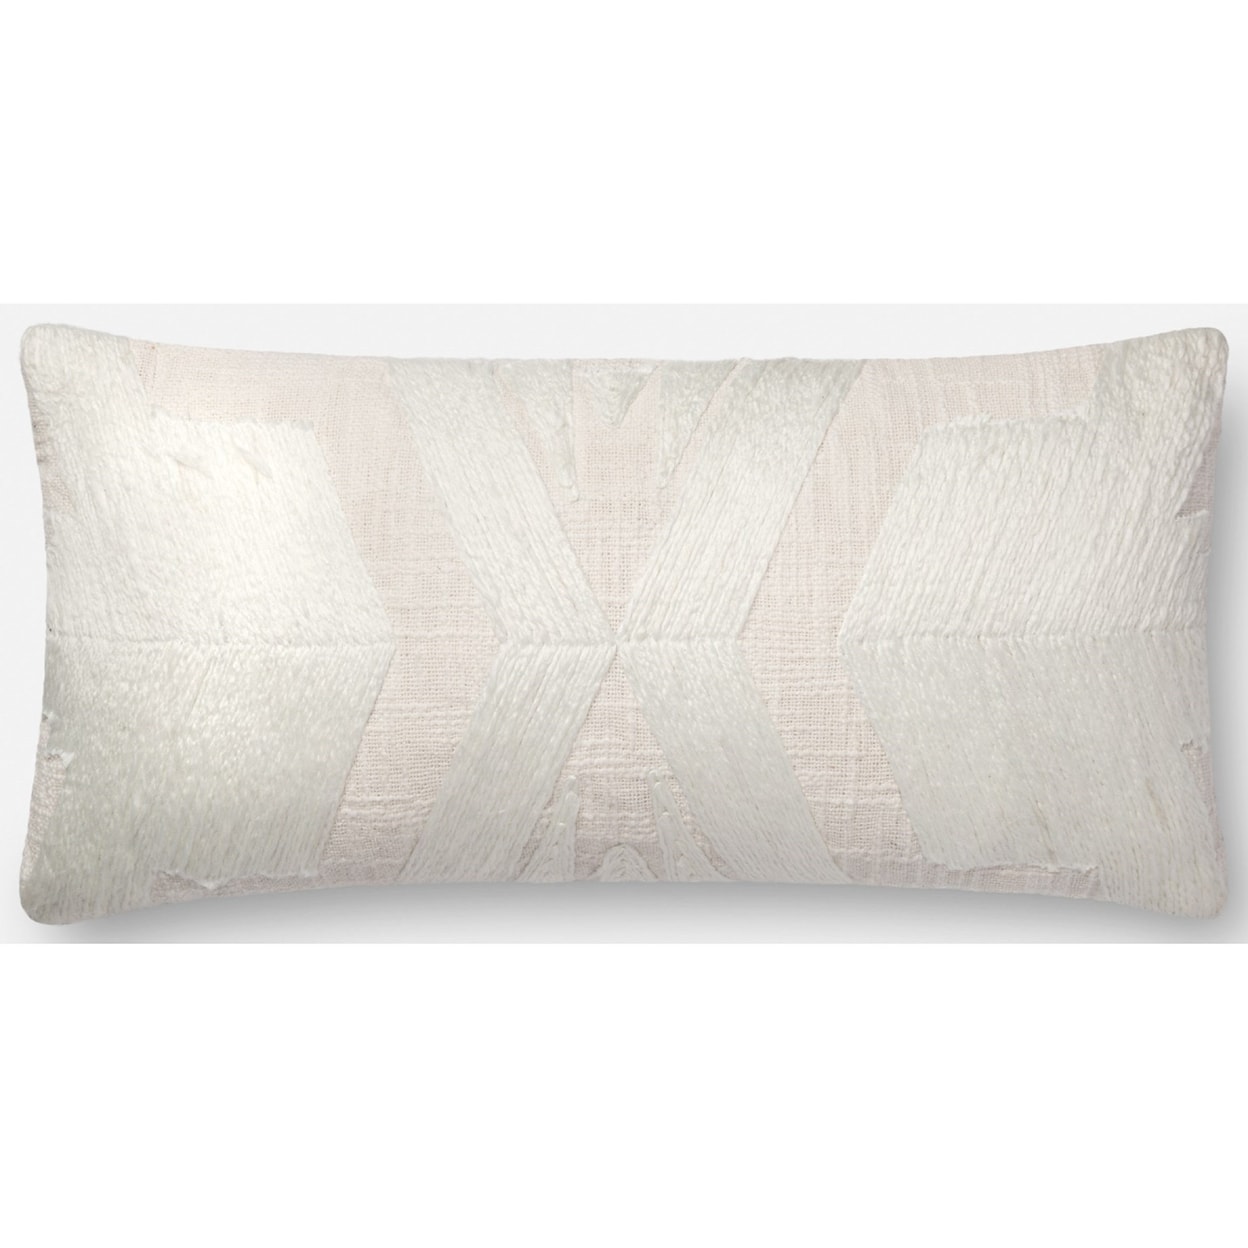 https://imageresizer.furnituredealer.net/img/remote/images.furnituredealer.net/img/products%2Fmagnolia_home_by_joanna_gaines_for_loloi%2Fcolor%2Faccent%20pillows--830843662_dsetp1089iv00pi13-b1.jpg?width=1248&height=1248&scale=both&trim.threshold=20&trim.percentpadding=0.5